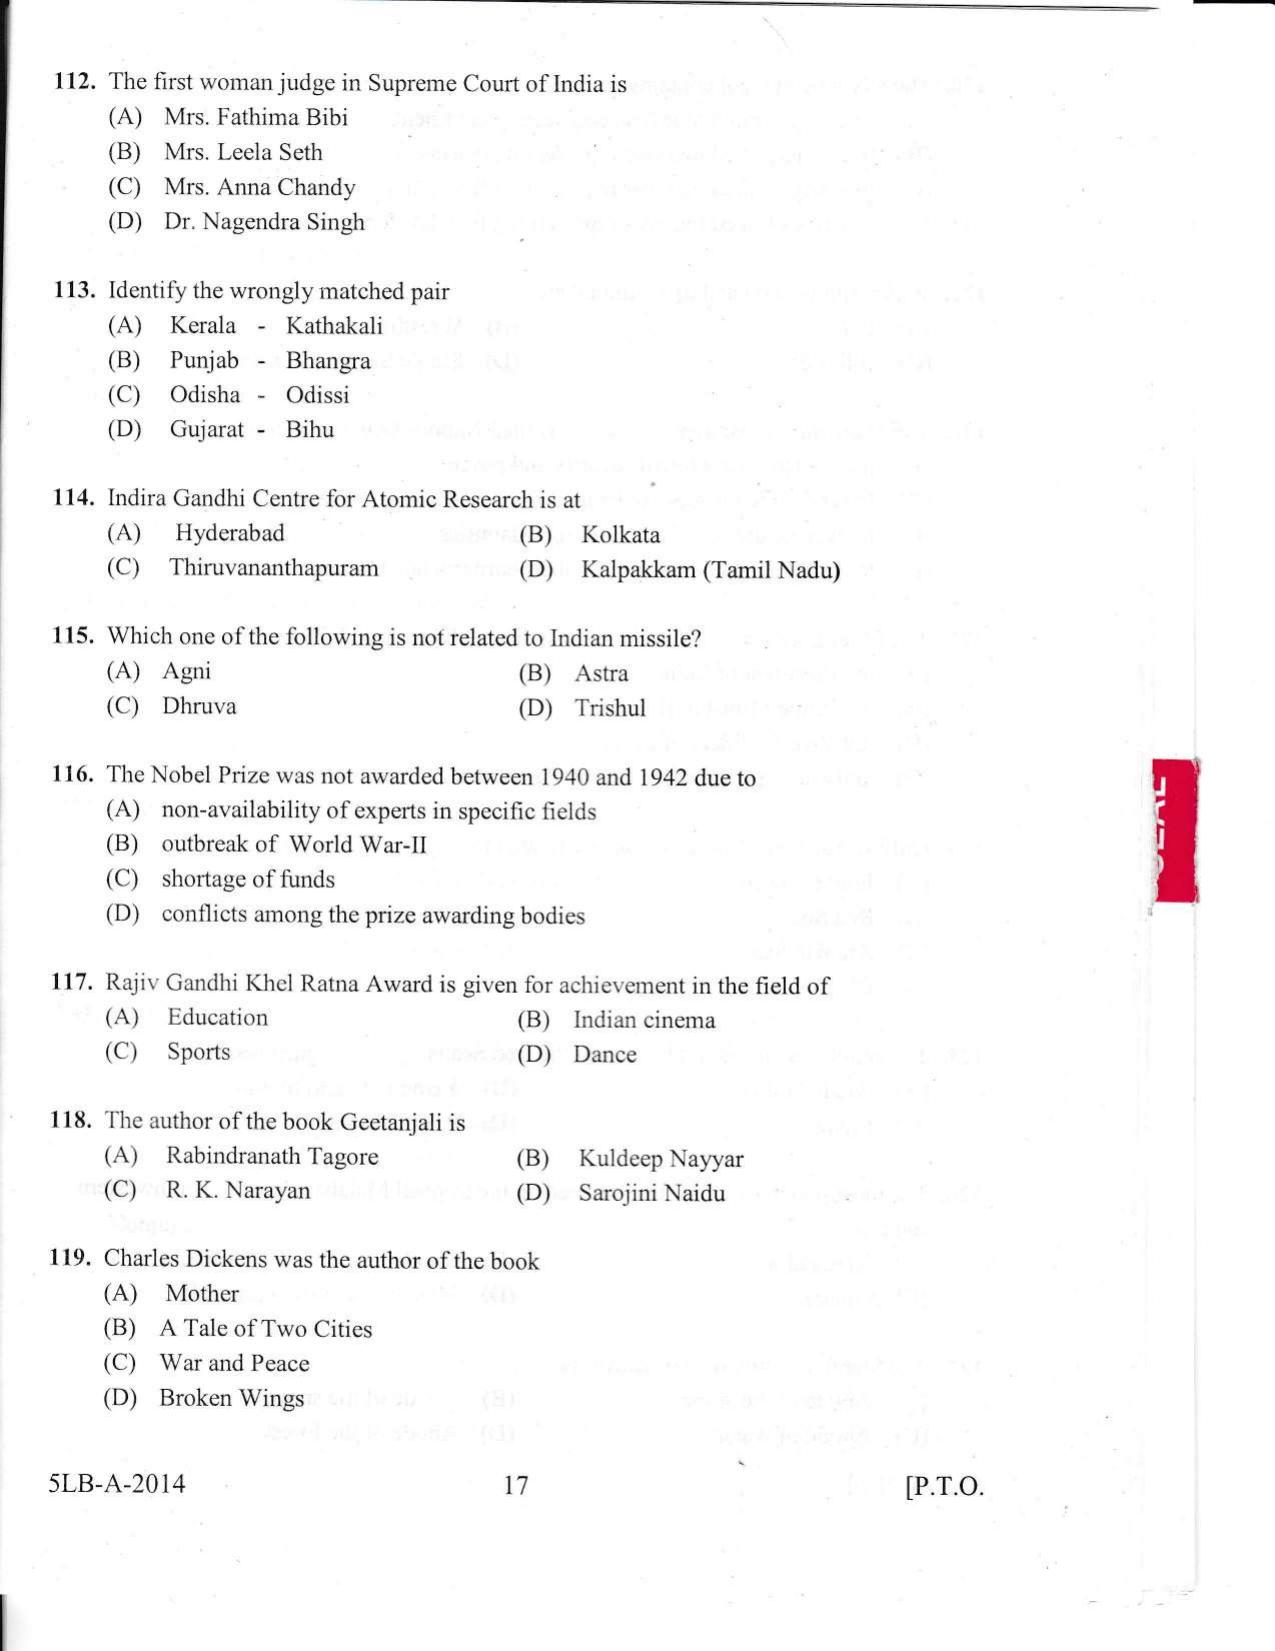 KLEE 5 Year LLB Exam 2014 Question Paper - Page 17